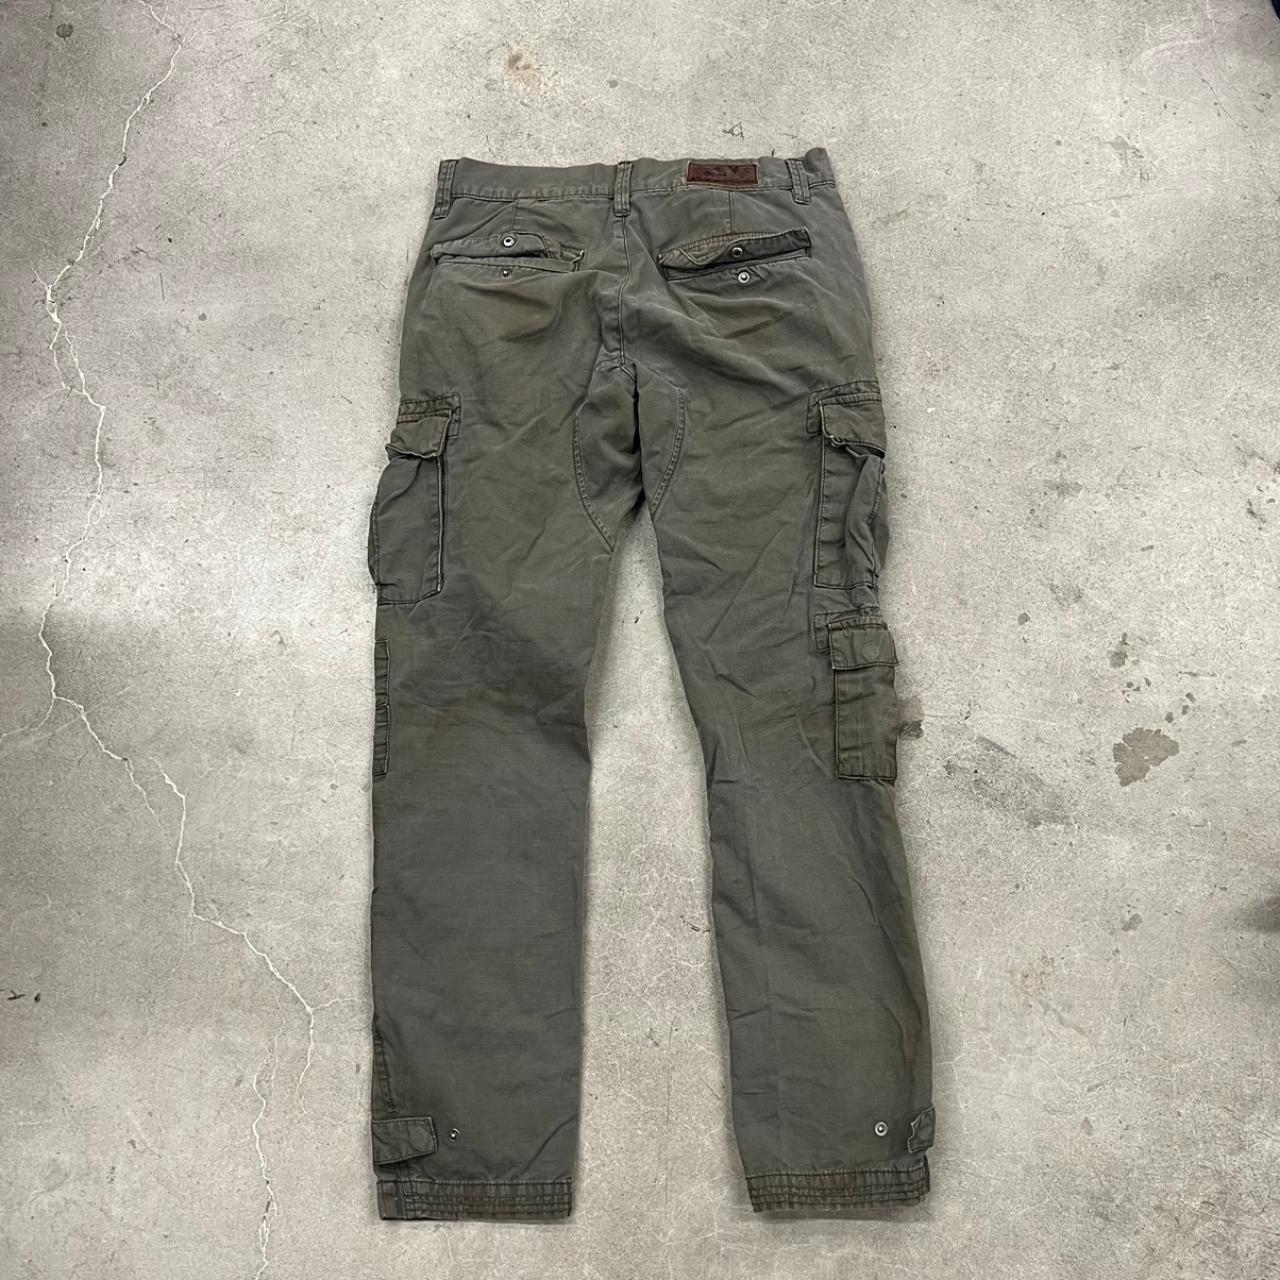 William east multi cargo pants military style